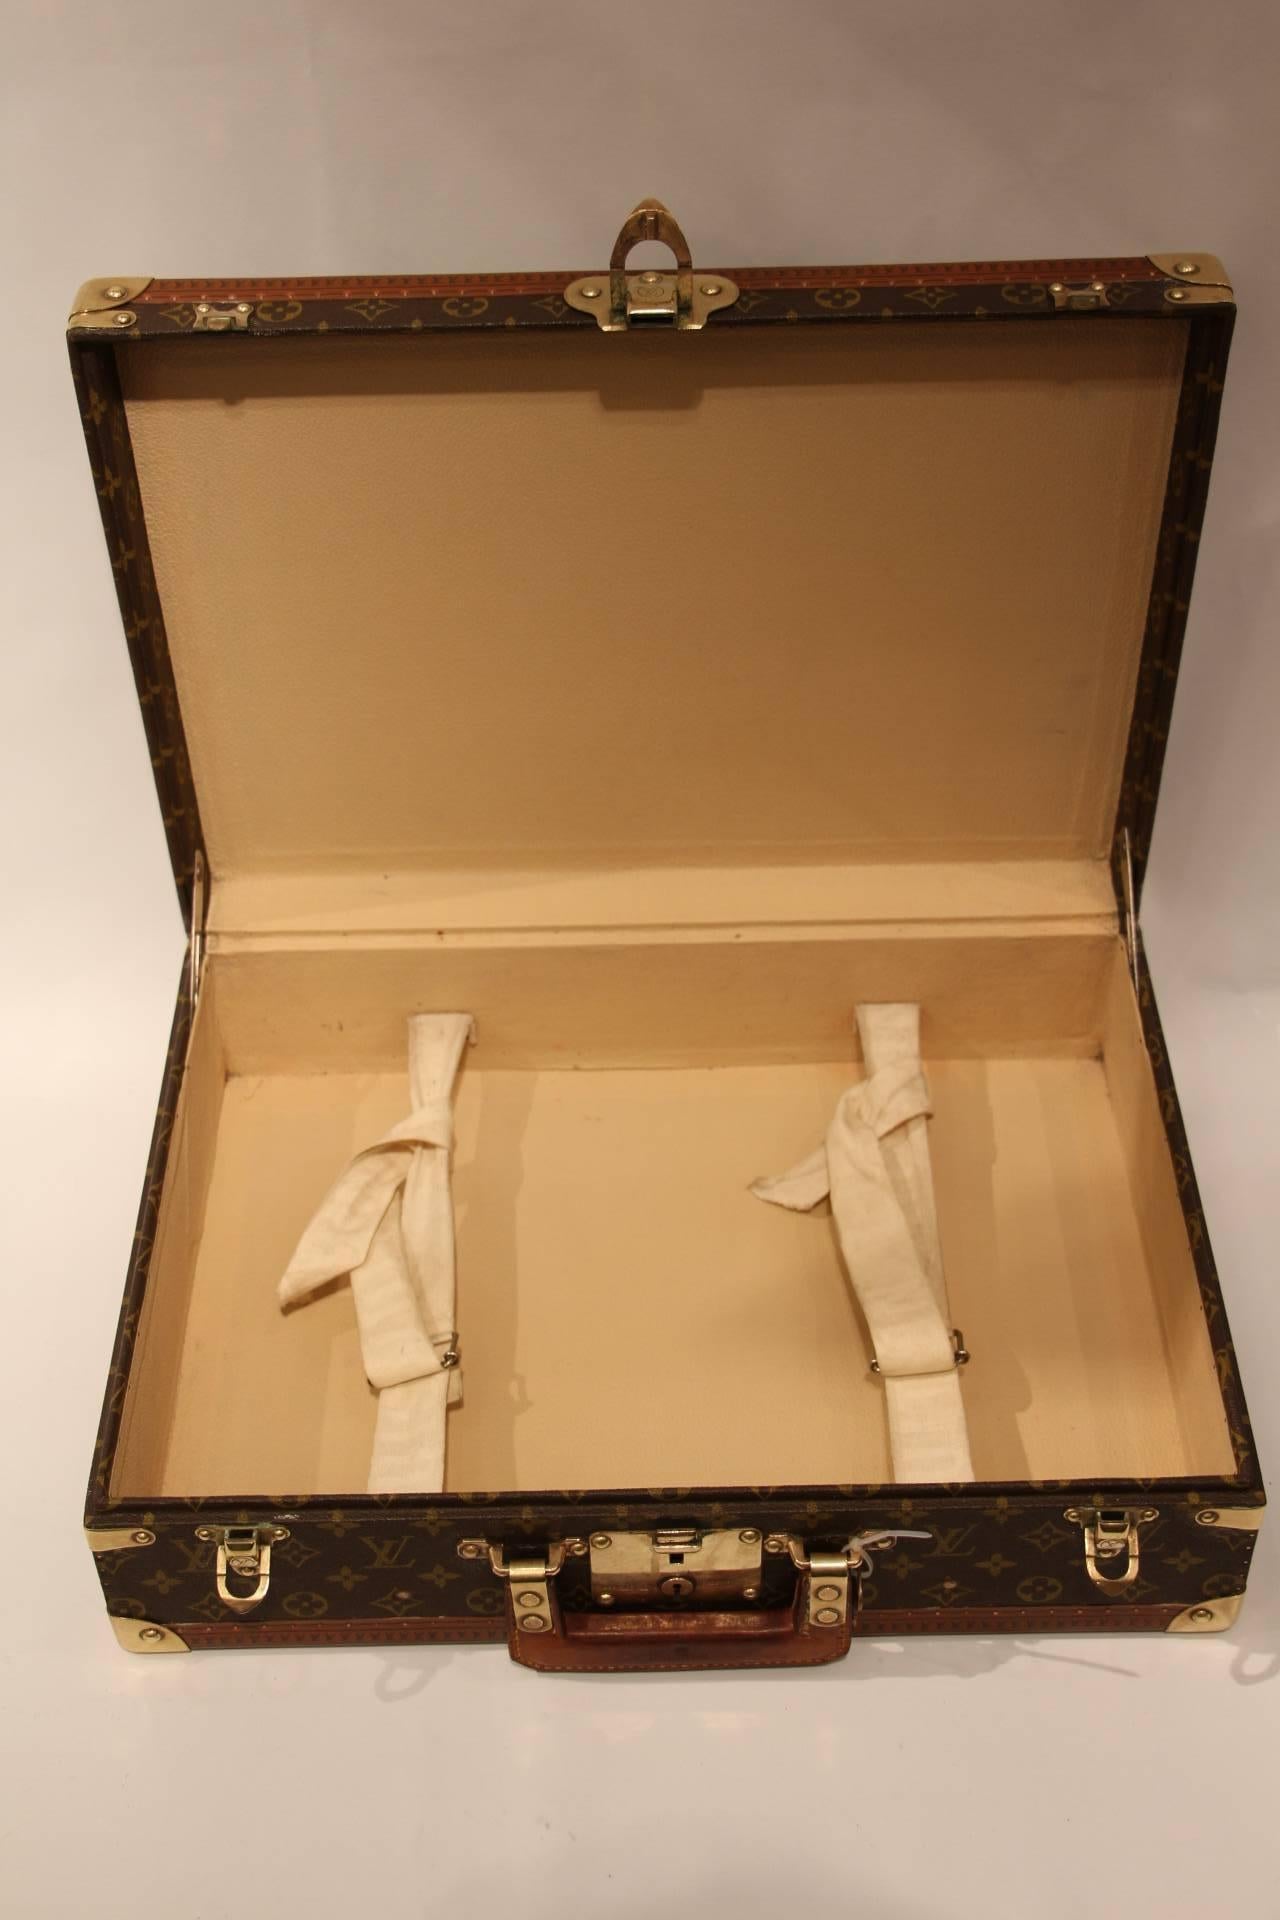 Very nice Louis Vuitton monogramm suitcase ,all brass fittings.
Very clean original interior.
It can be used for travel or as a very chic piece of decoration.

